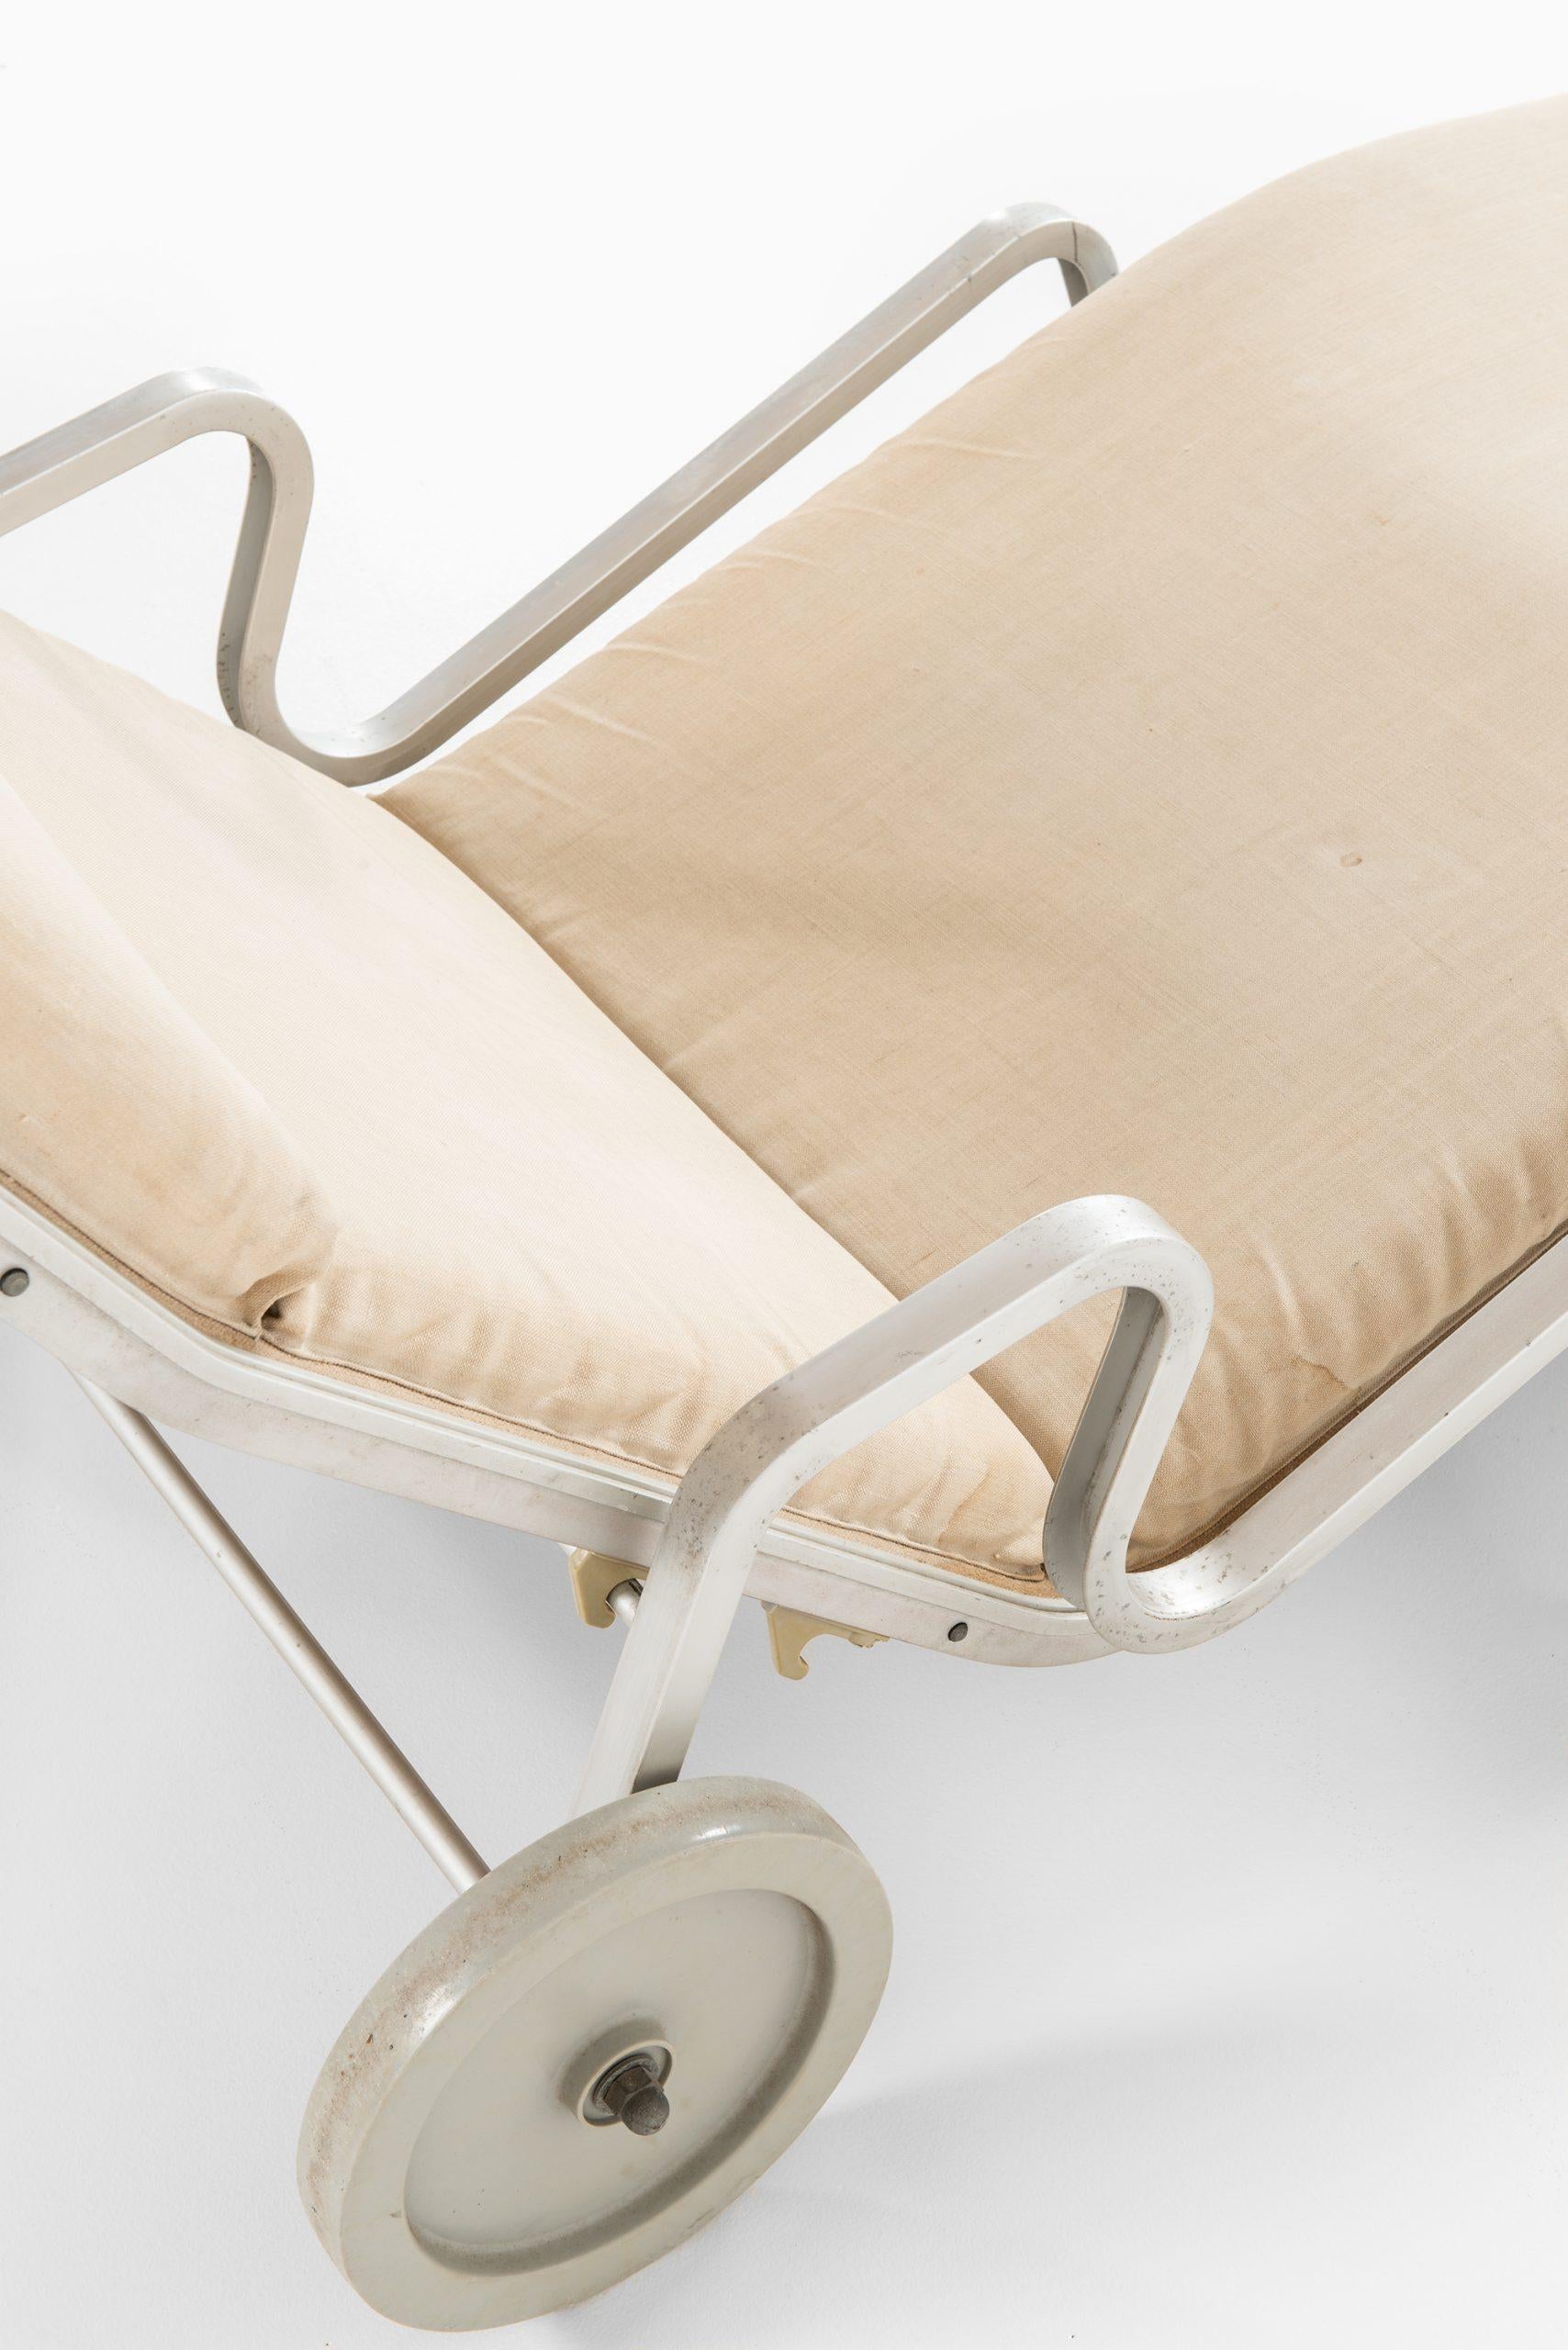 Mid-20th Century Eric Sigfrid Persson Sunbed / Lounge Chair Produced in Sweden For Sale